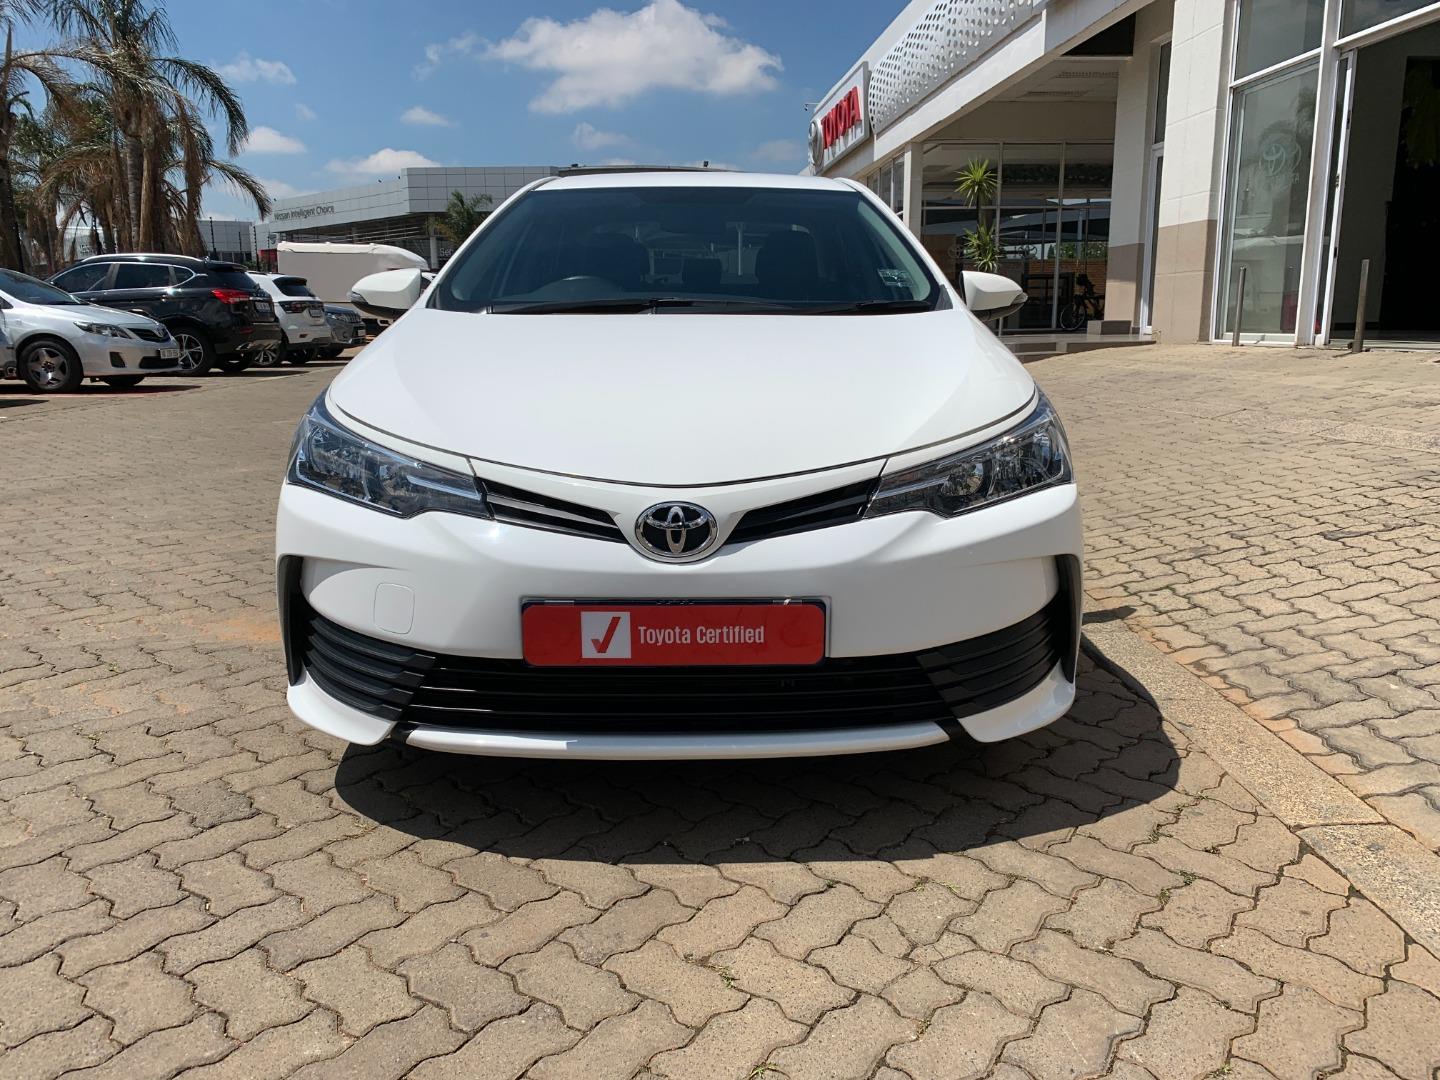 Toyota Corolla Quest MY21.1 2021 for sale in , Johannesburg South